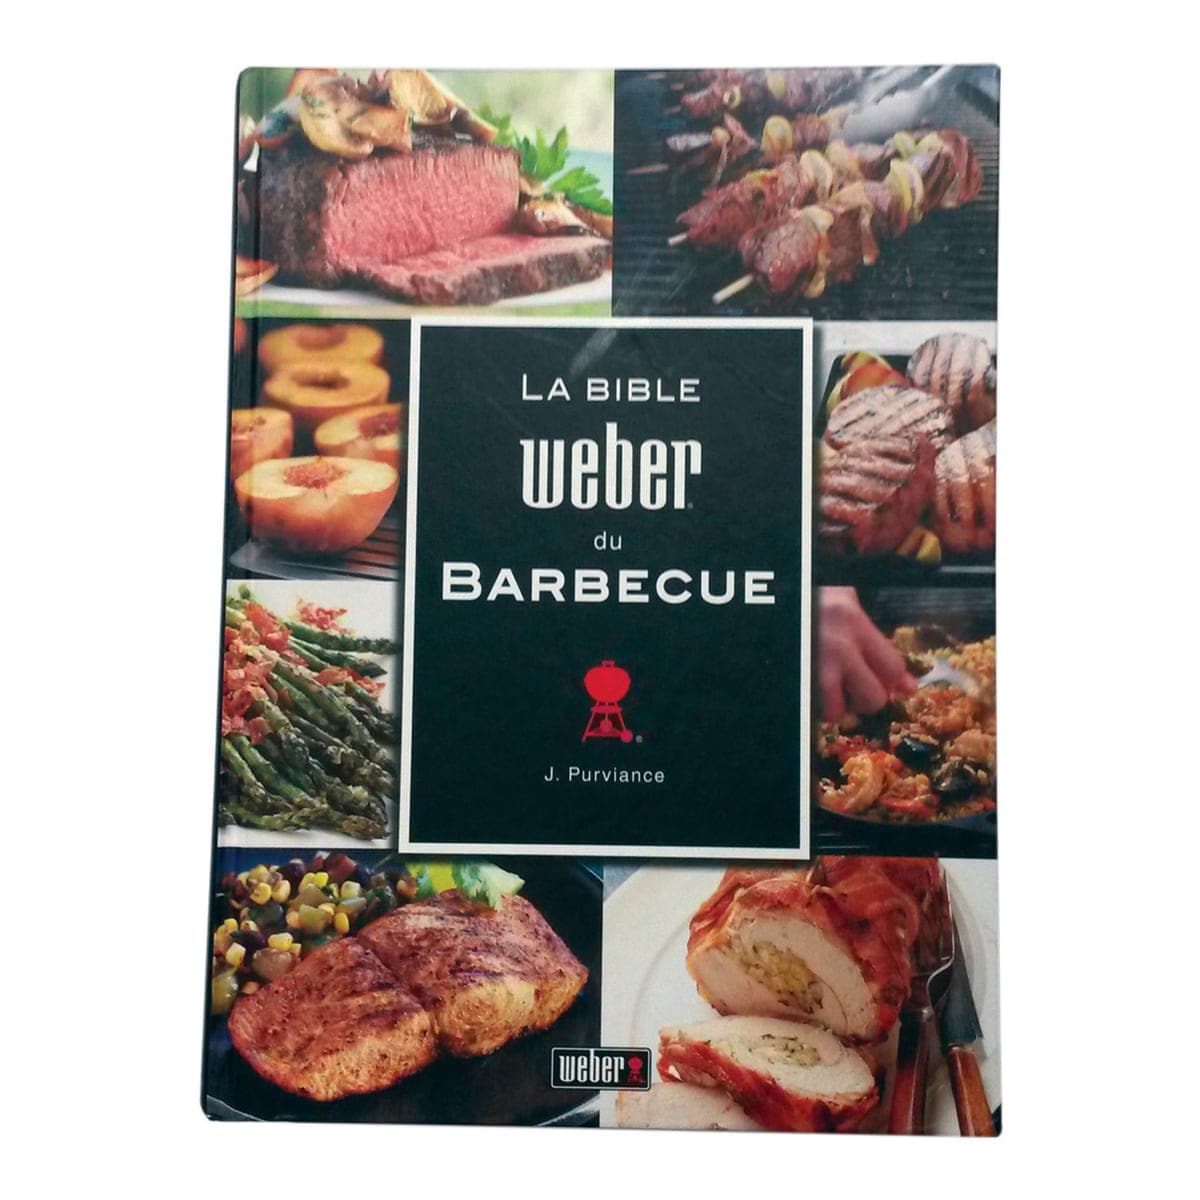 THE WEBER BARBECUE BIBLE COOKBOOK